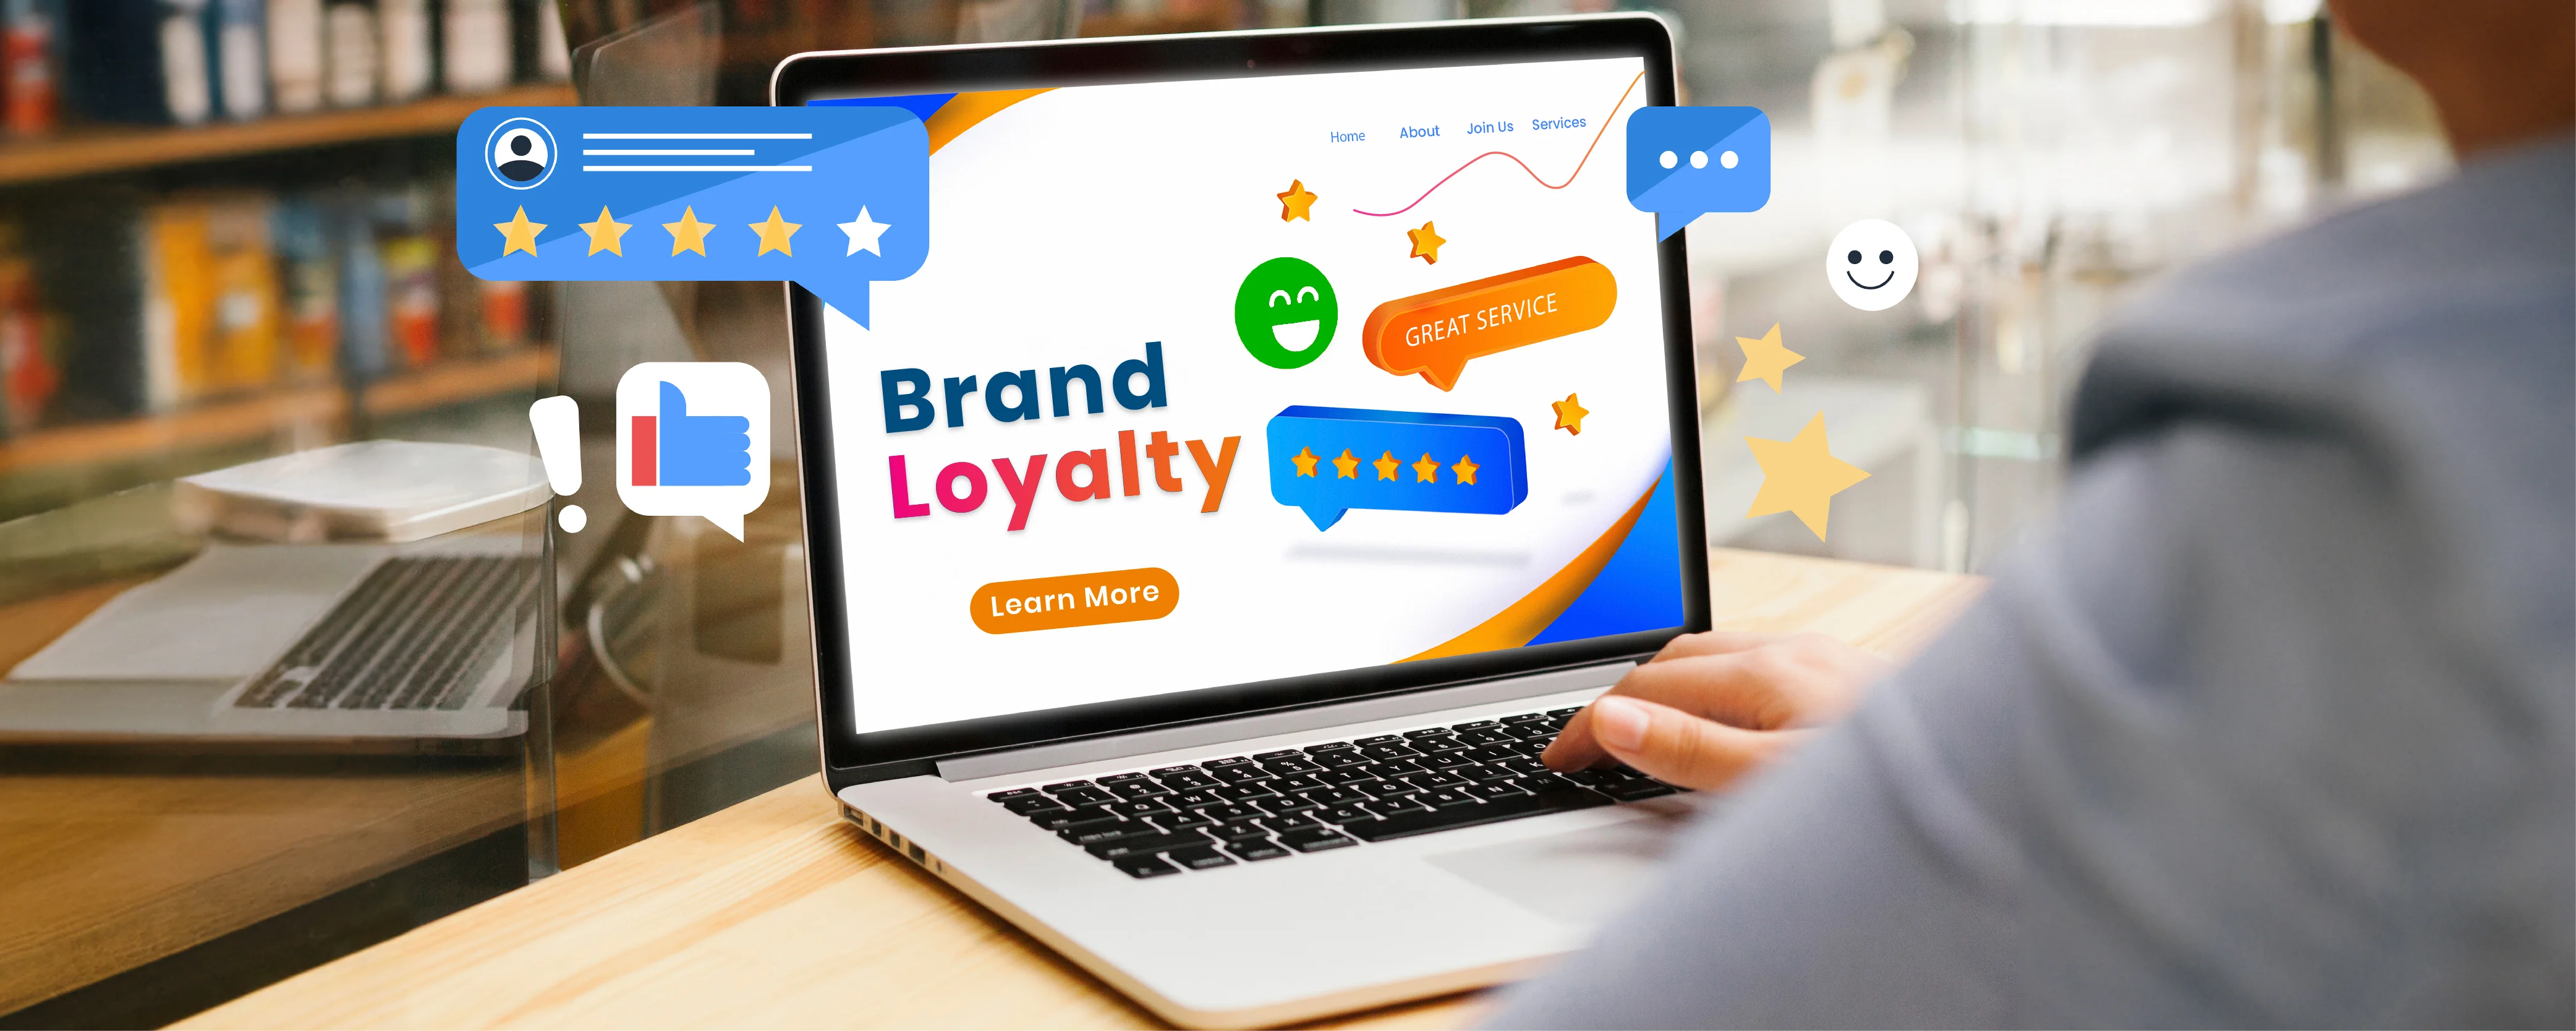 Understanding Brand Loyalty: Importance, Types and Benefits